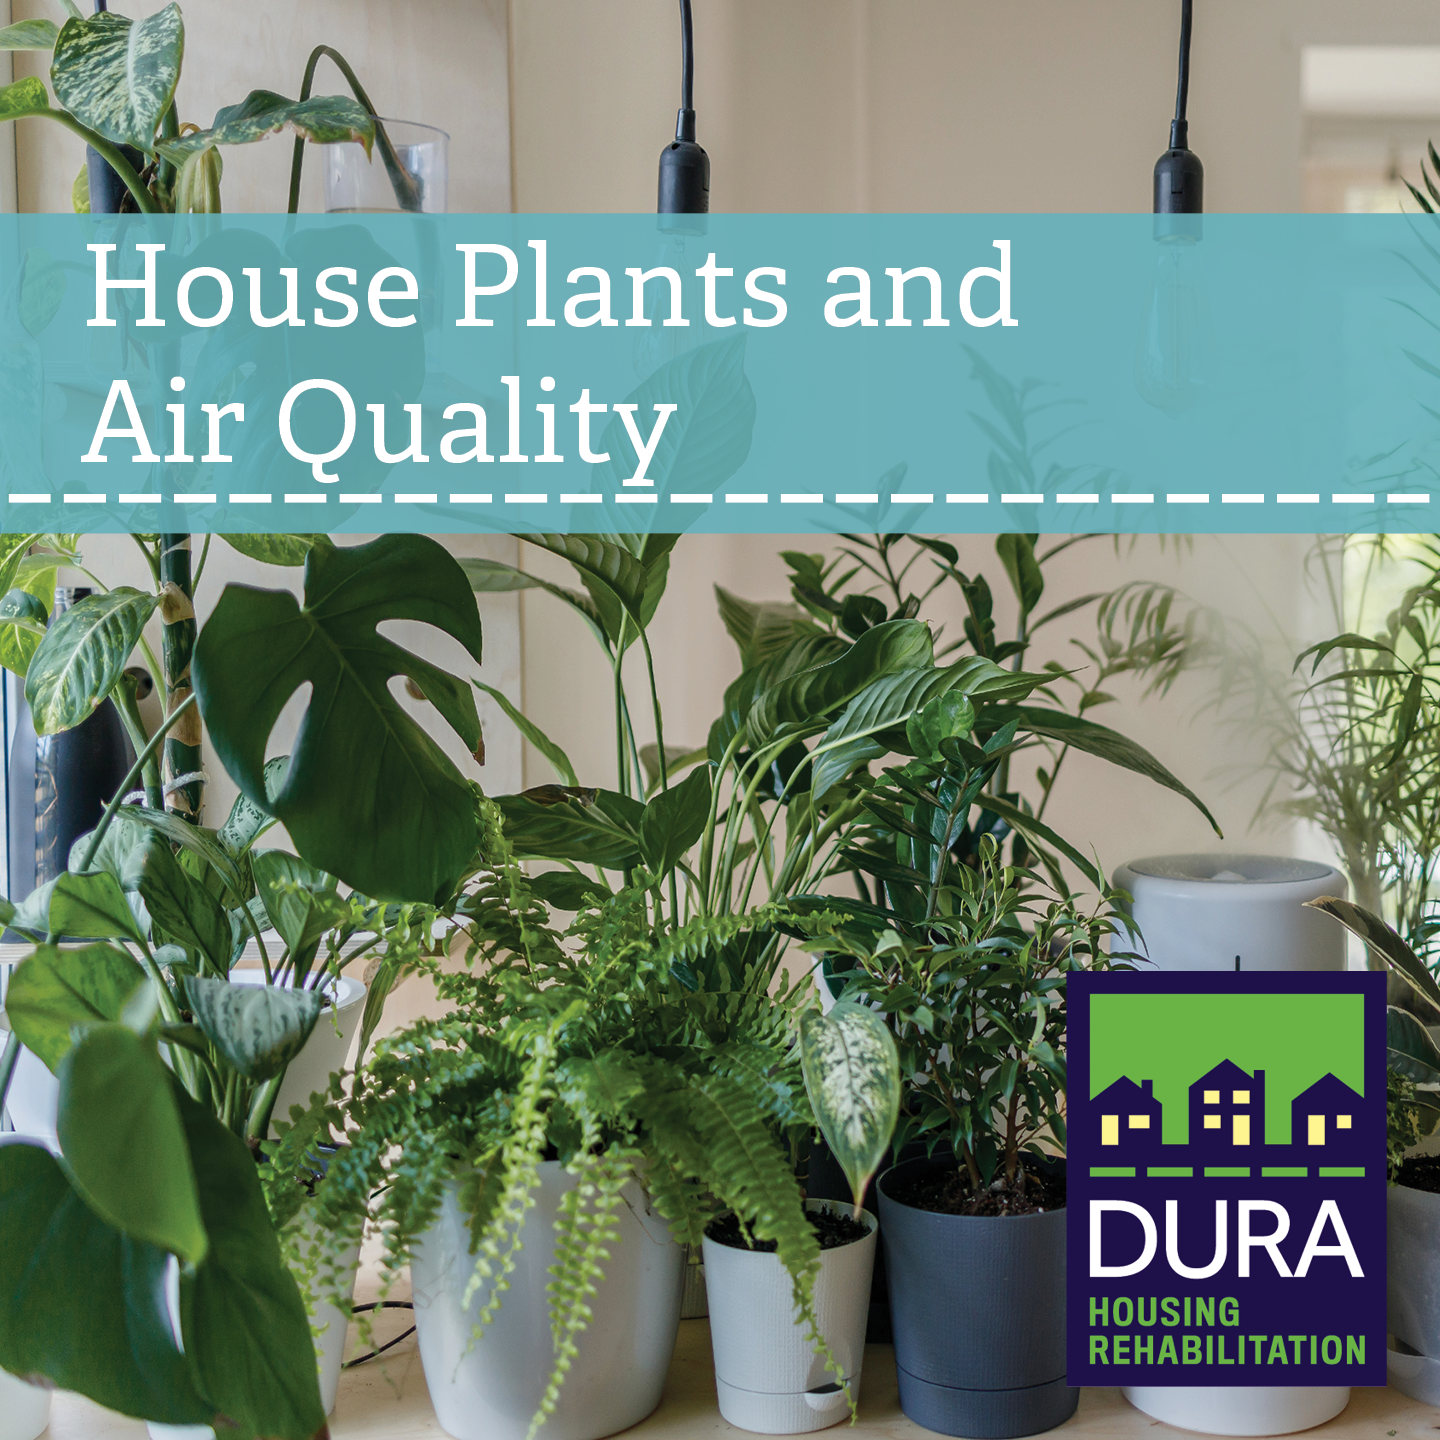 House plants lined up on a kitchen counter. Text overlay reads "House Plants and Air Quality." The DURA logo is in the bottom right corner.